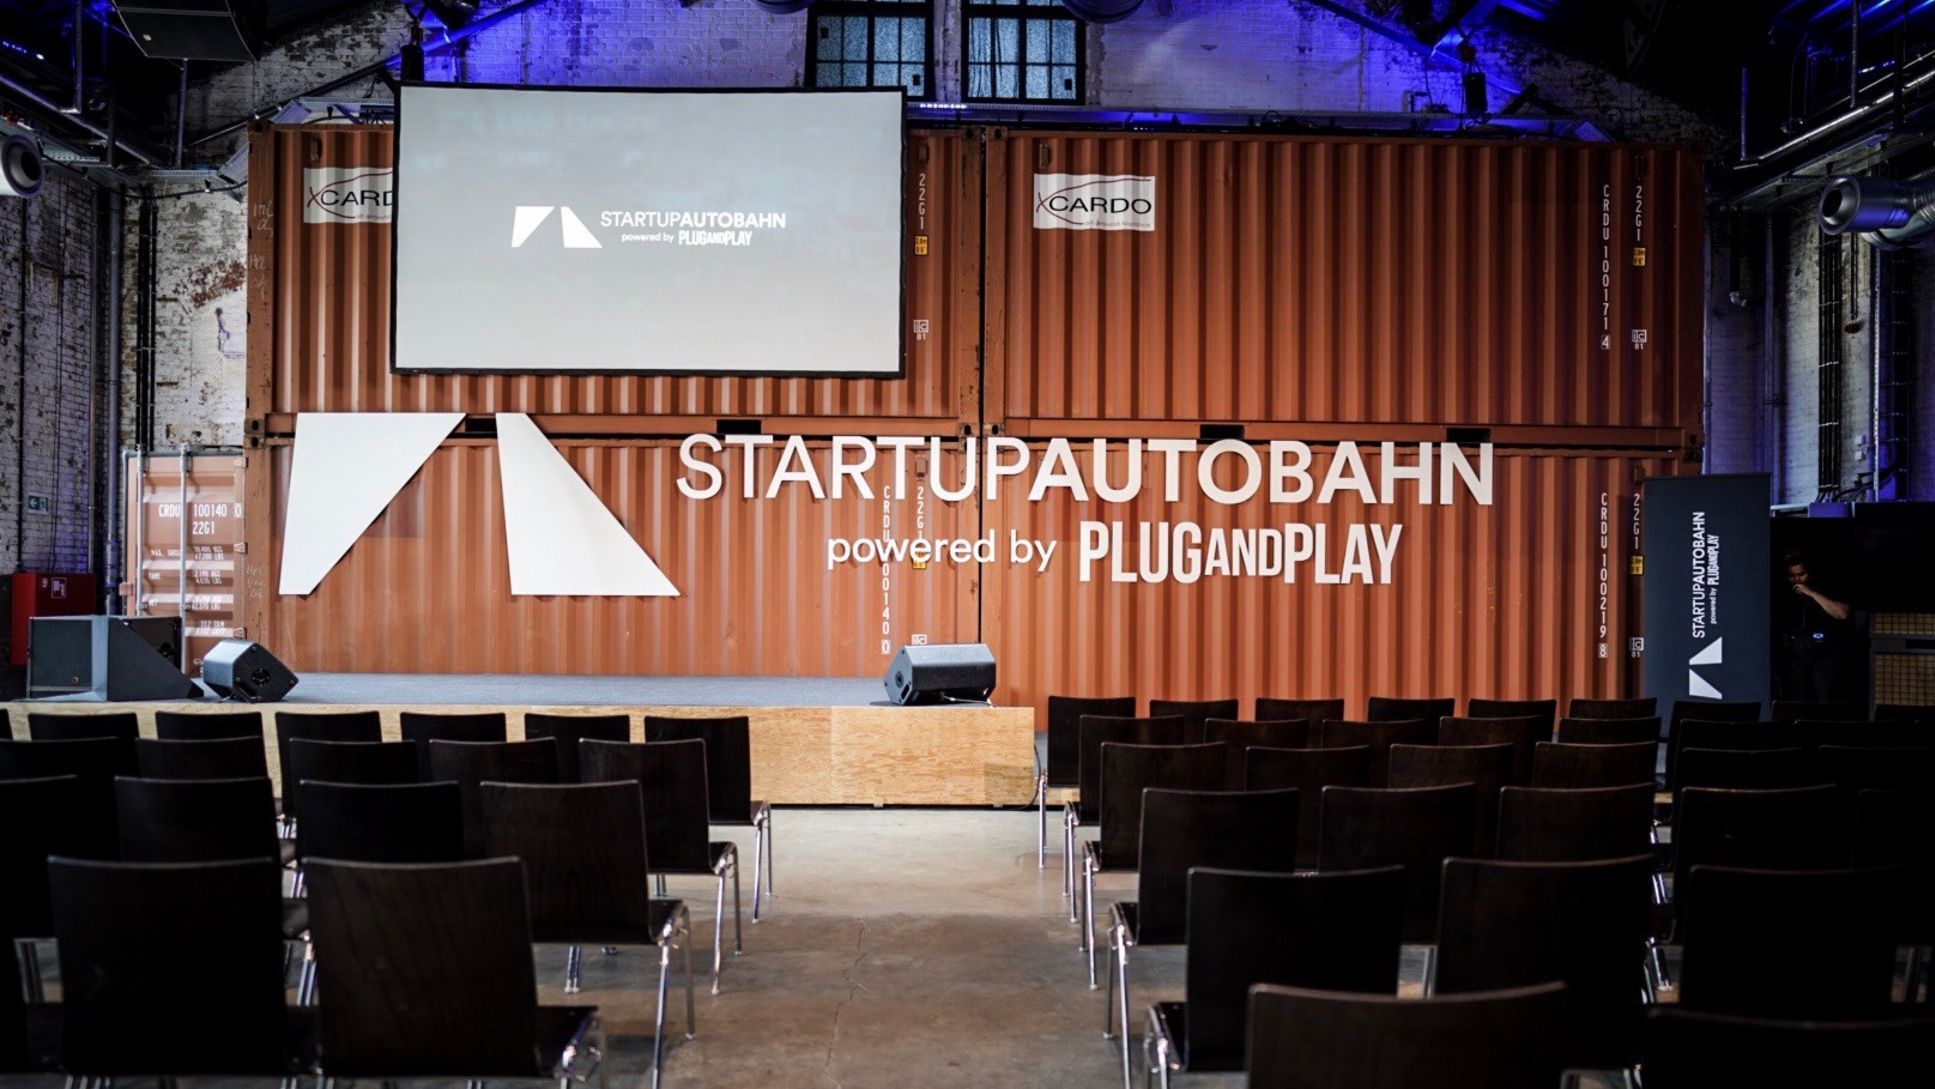 Five Years of Innovations: happy Birthday, Startup Autobahn - Image 1